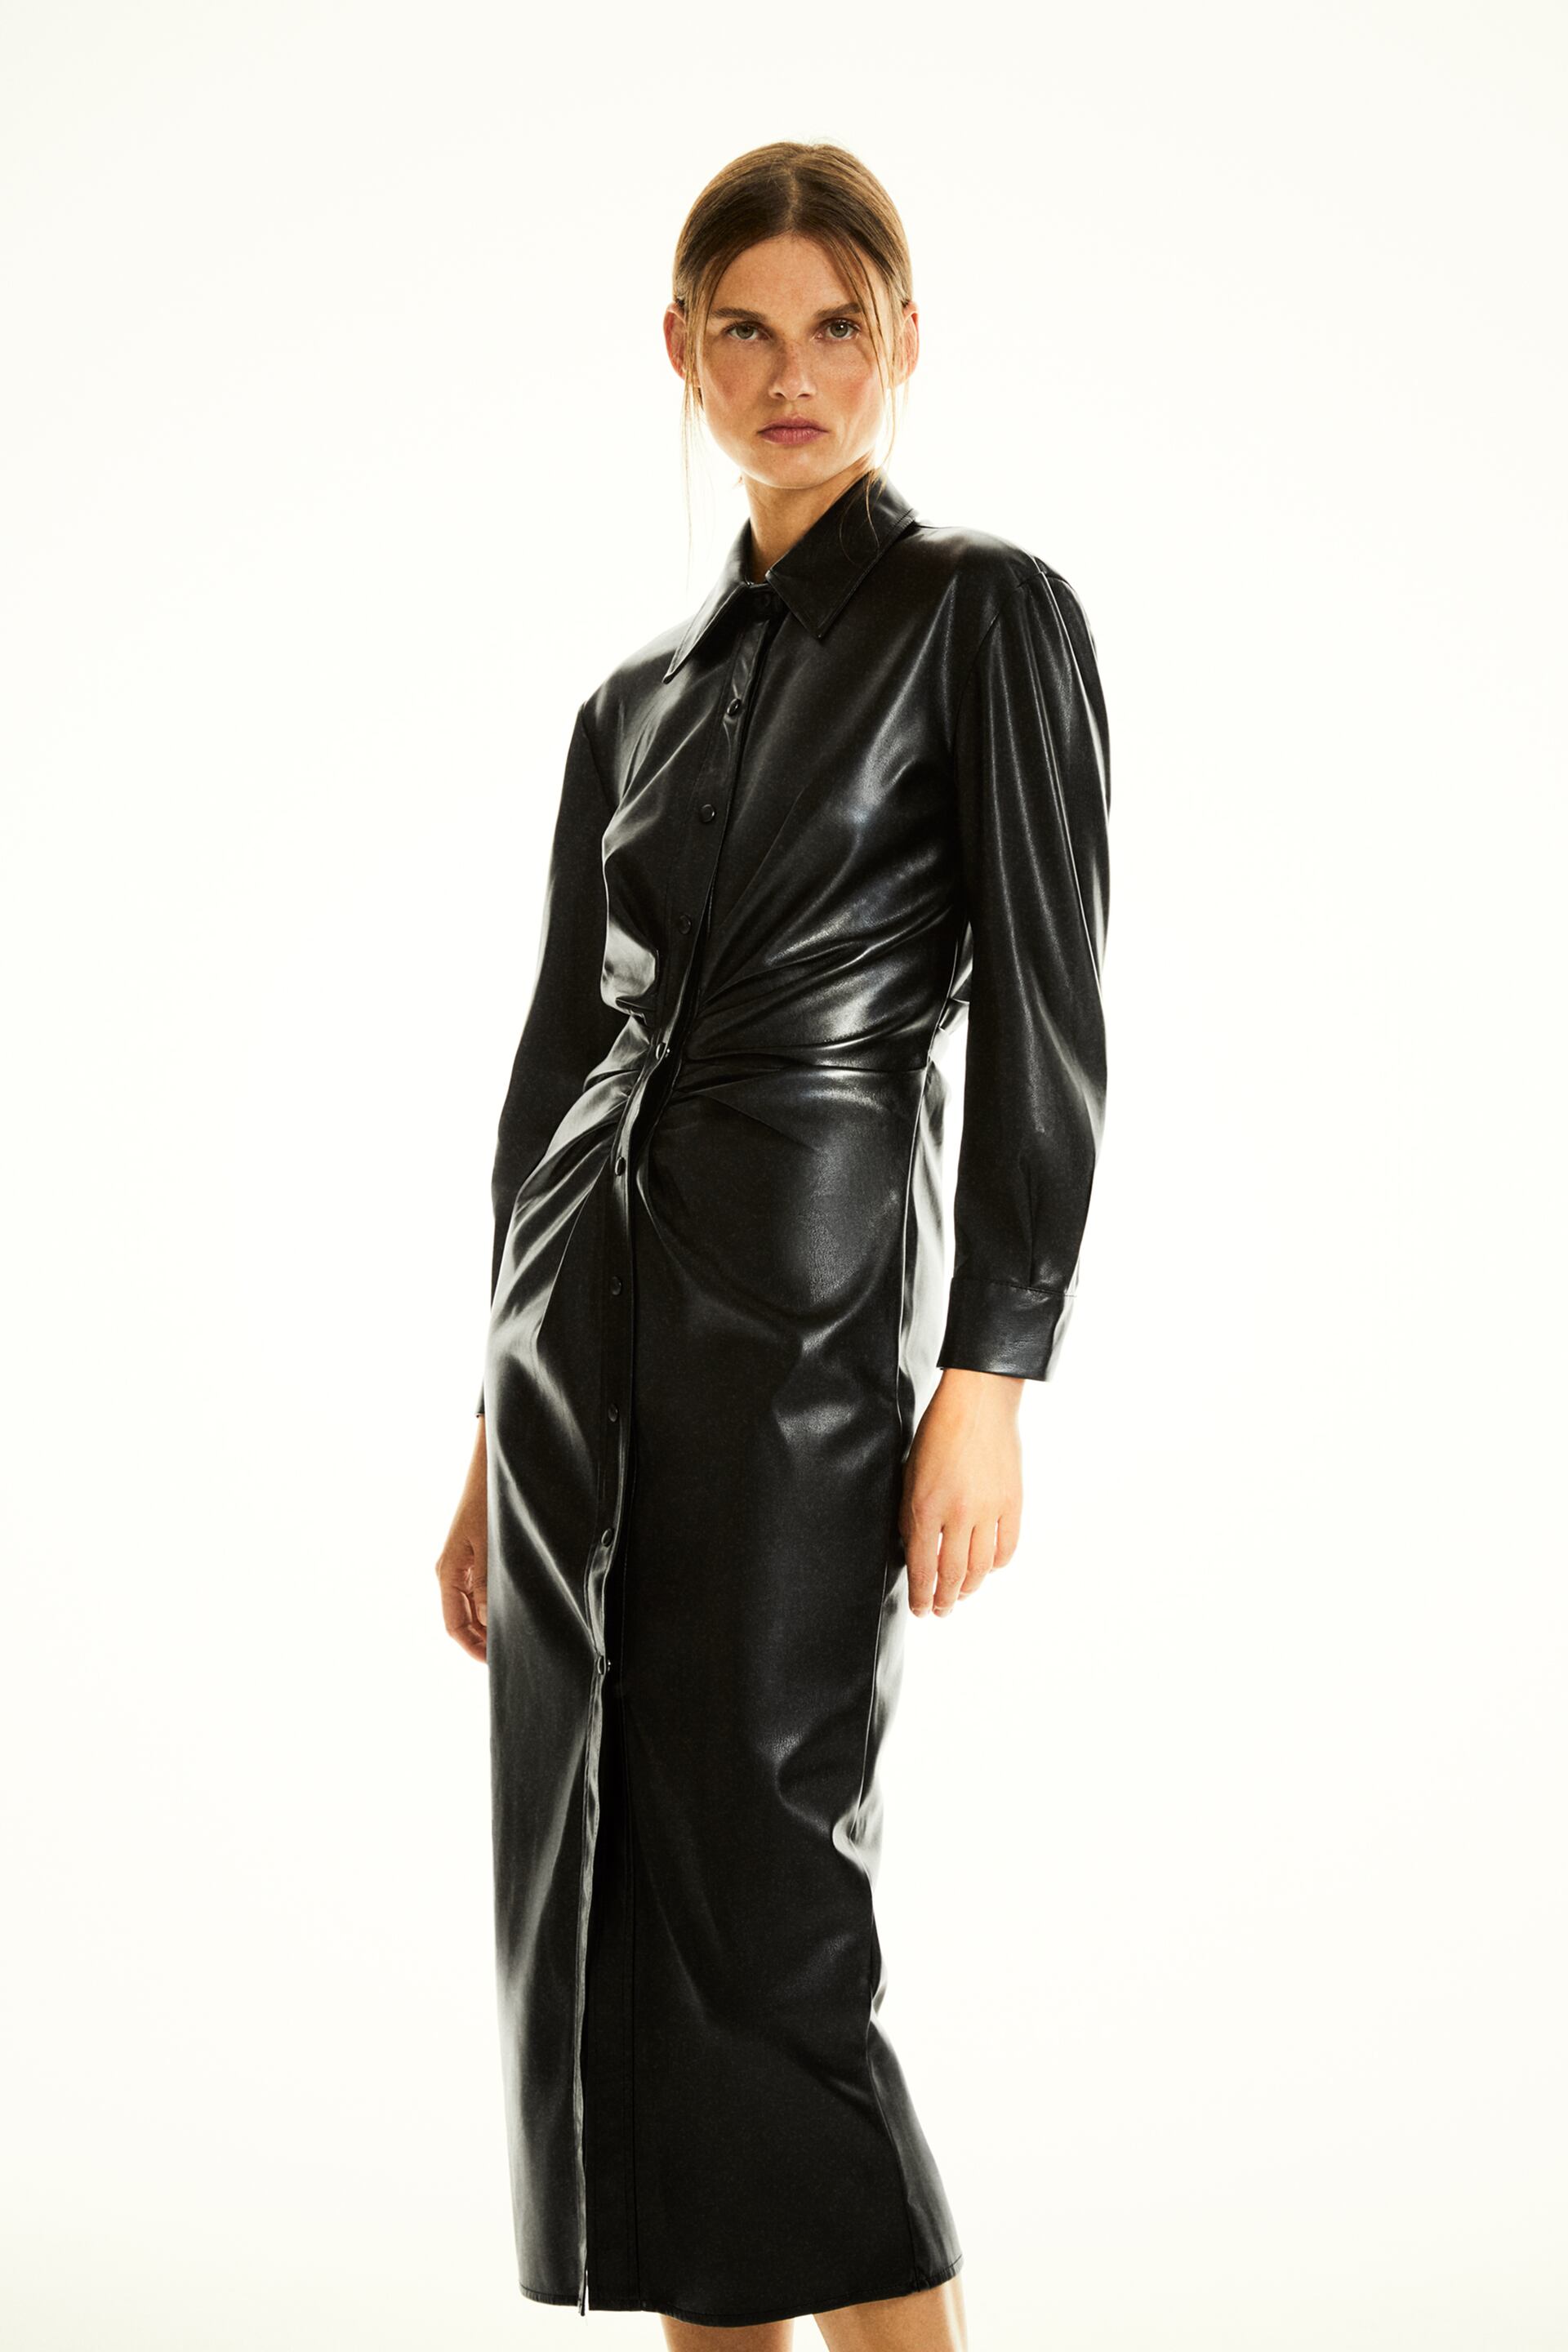 Our Selection Of The Best Winter Dresses Of 2020. Faux Leather Shirt Dress from Zara.